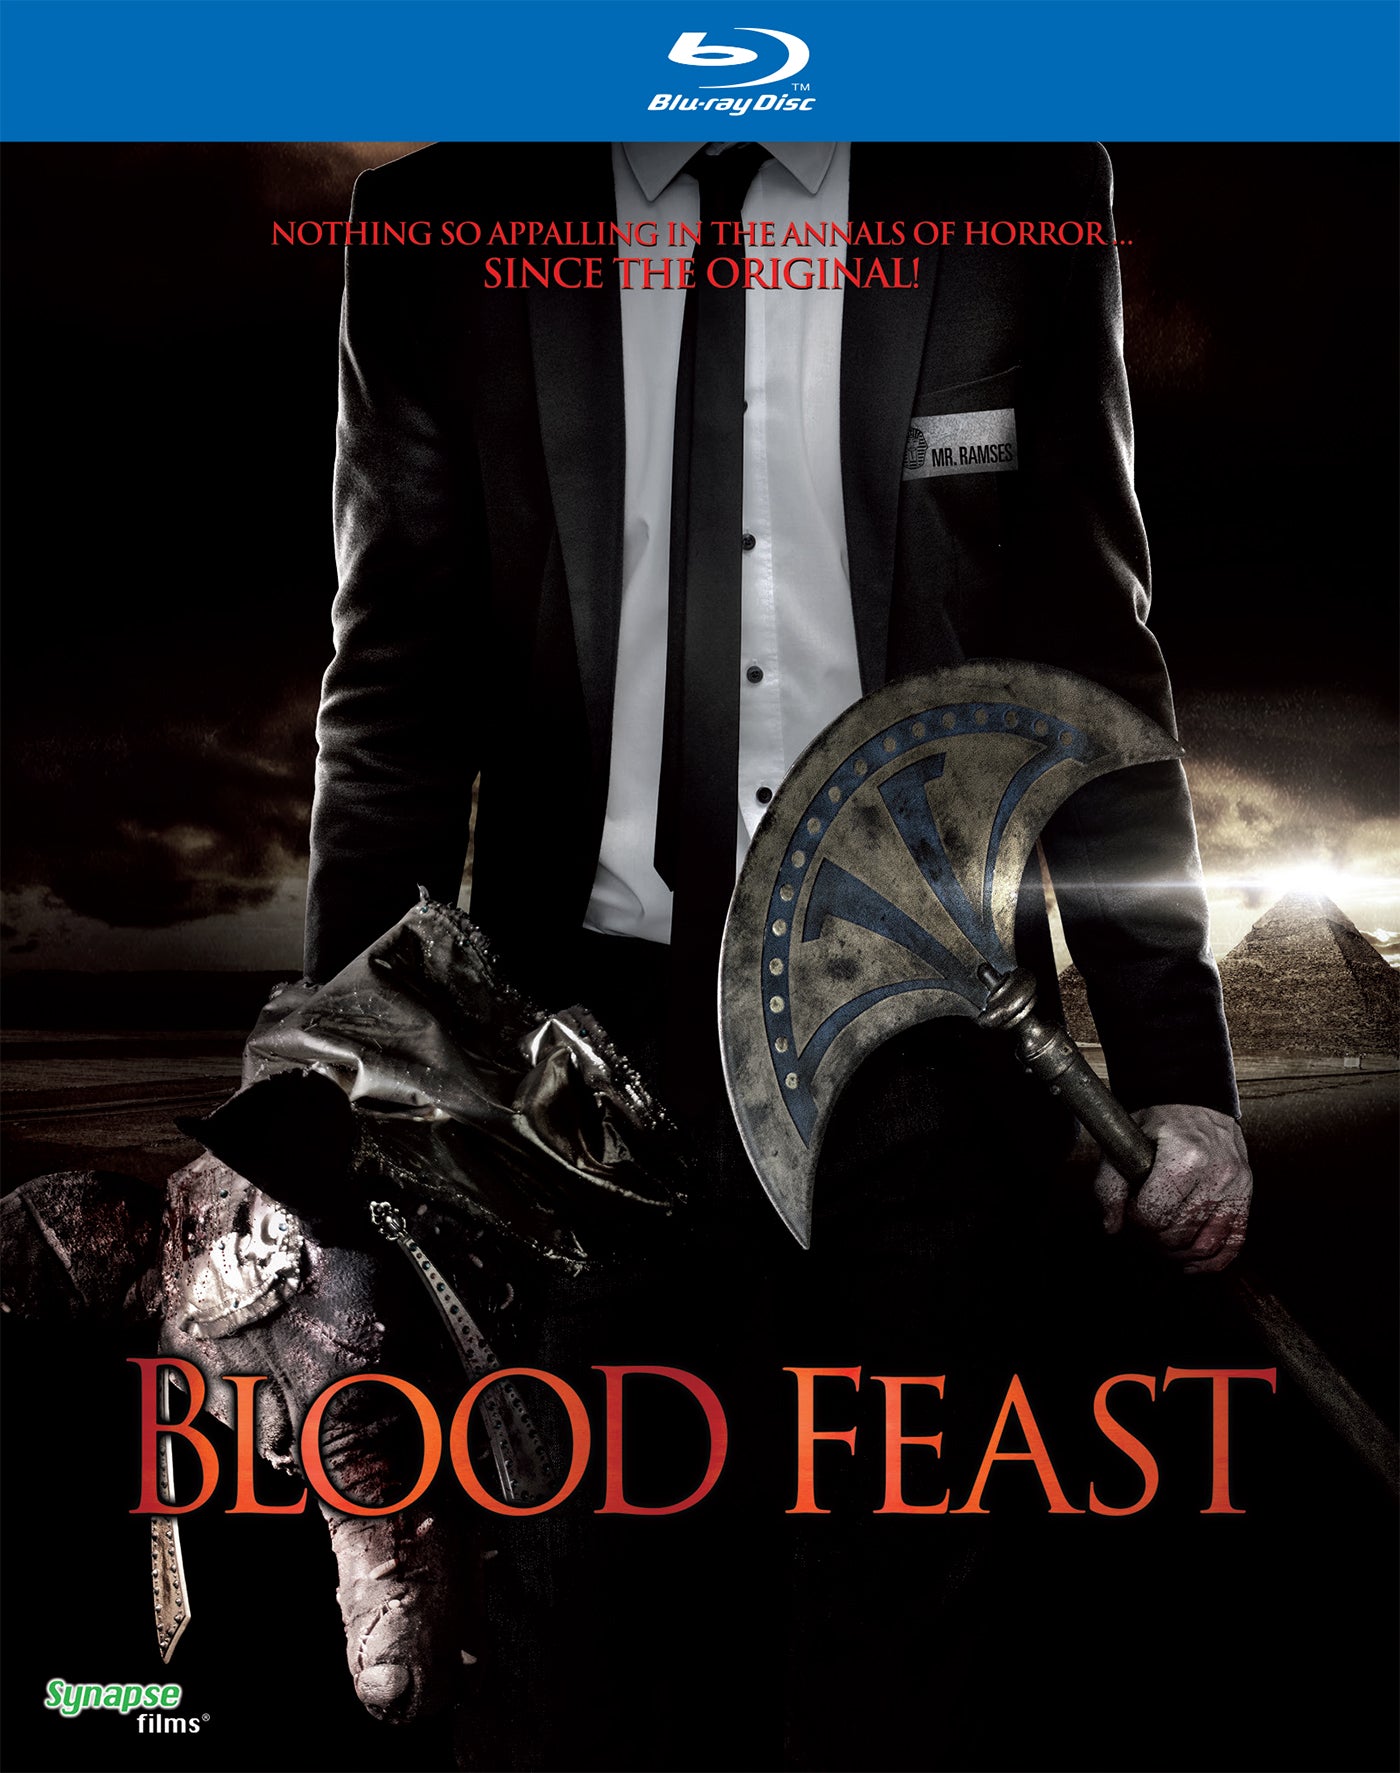 Blood Feast Blu-ray with Slipcover (Synapse Films)